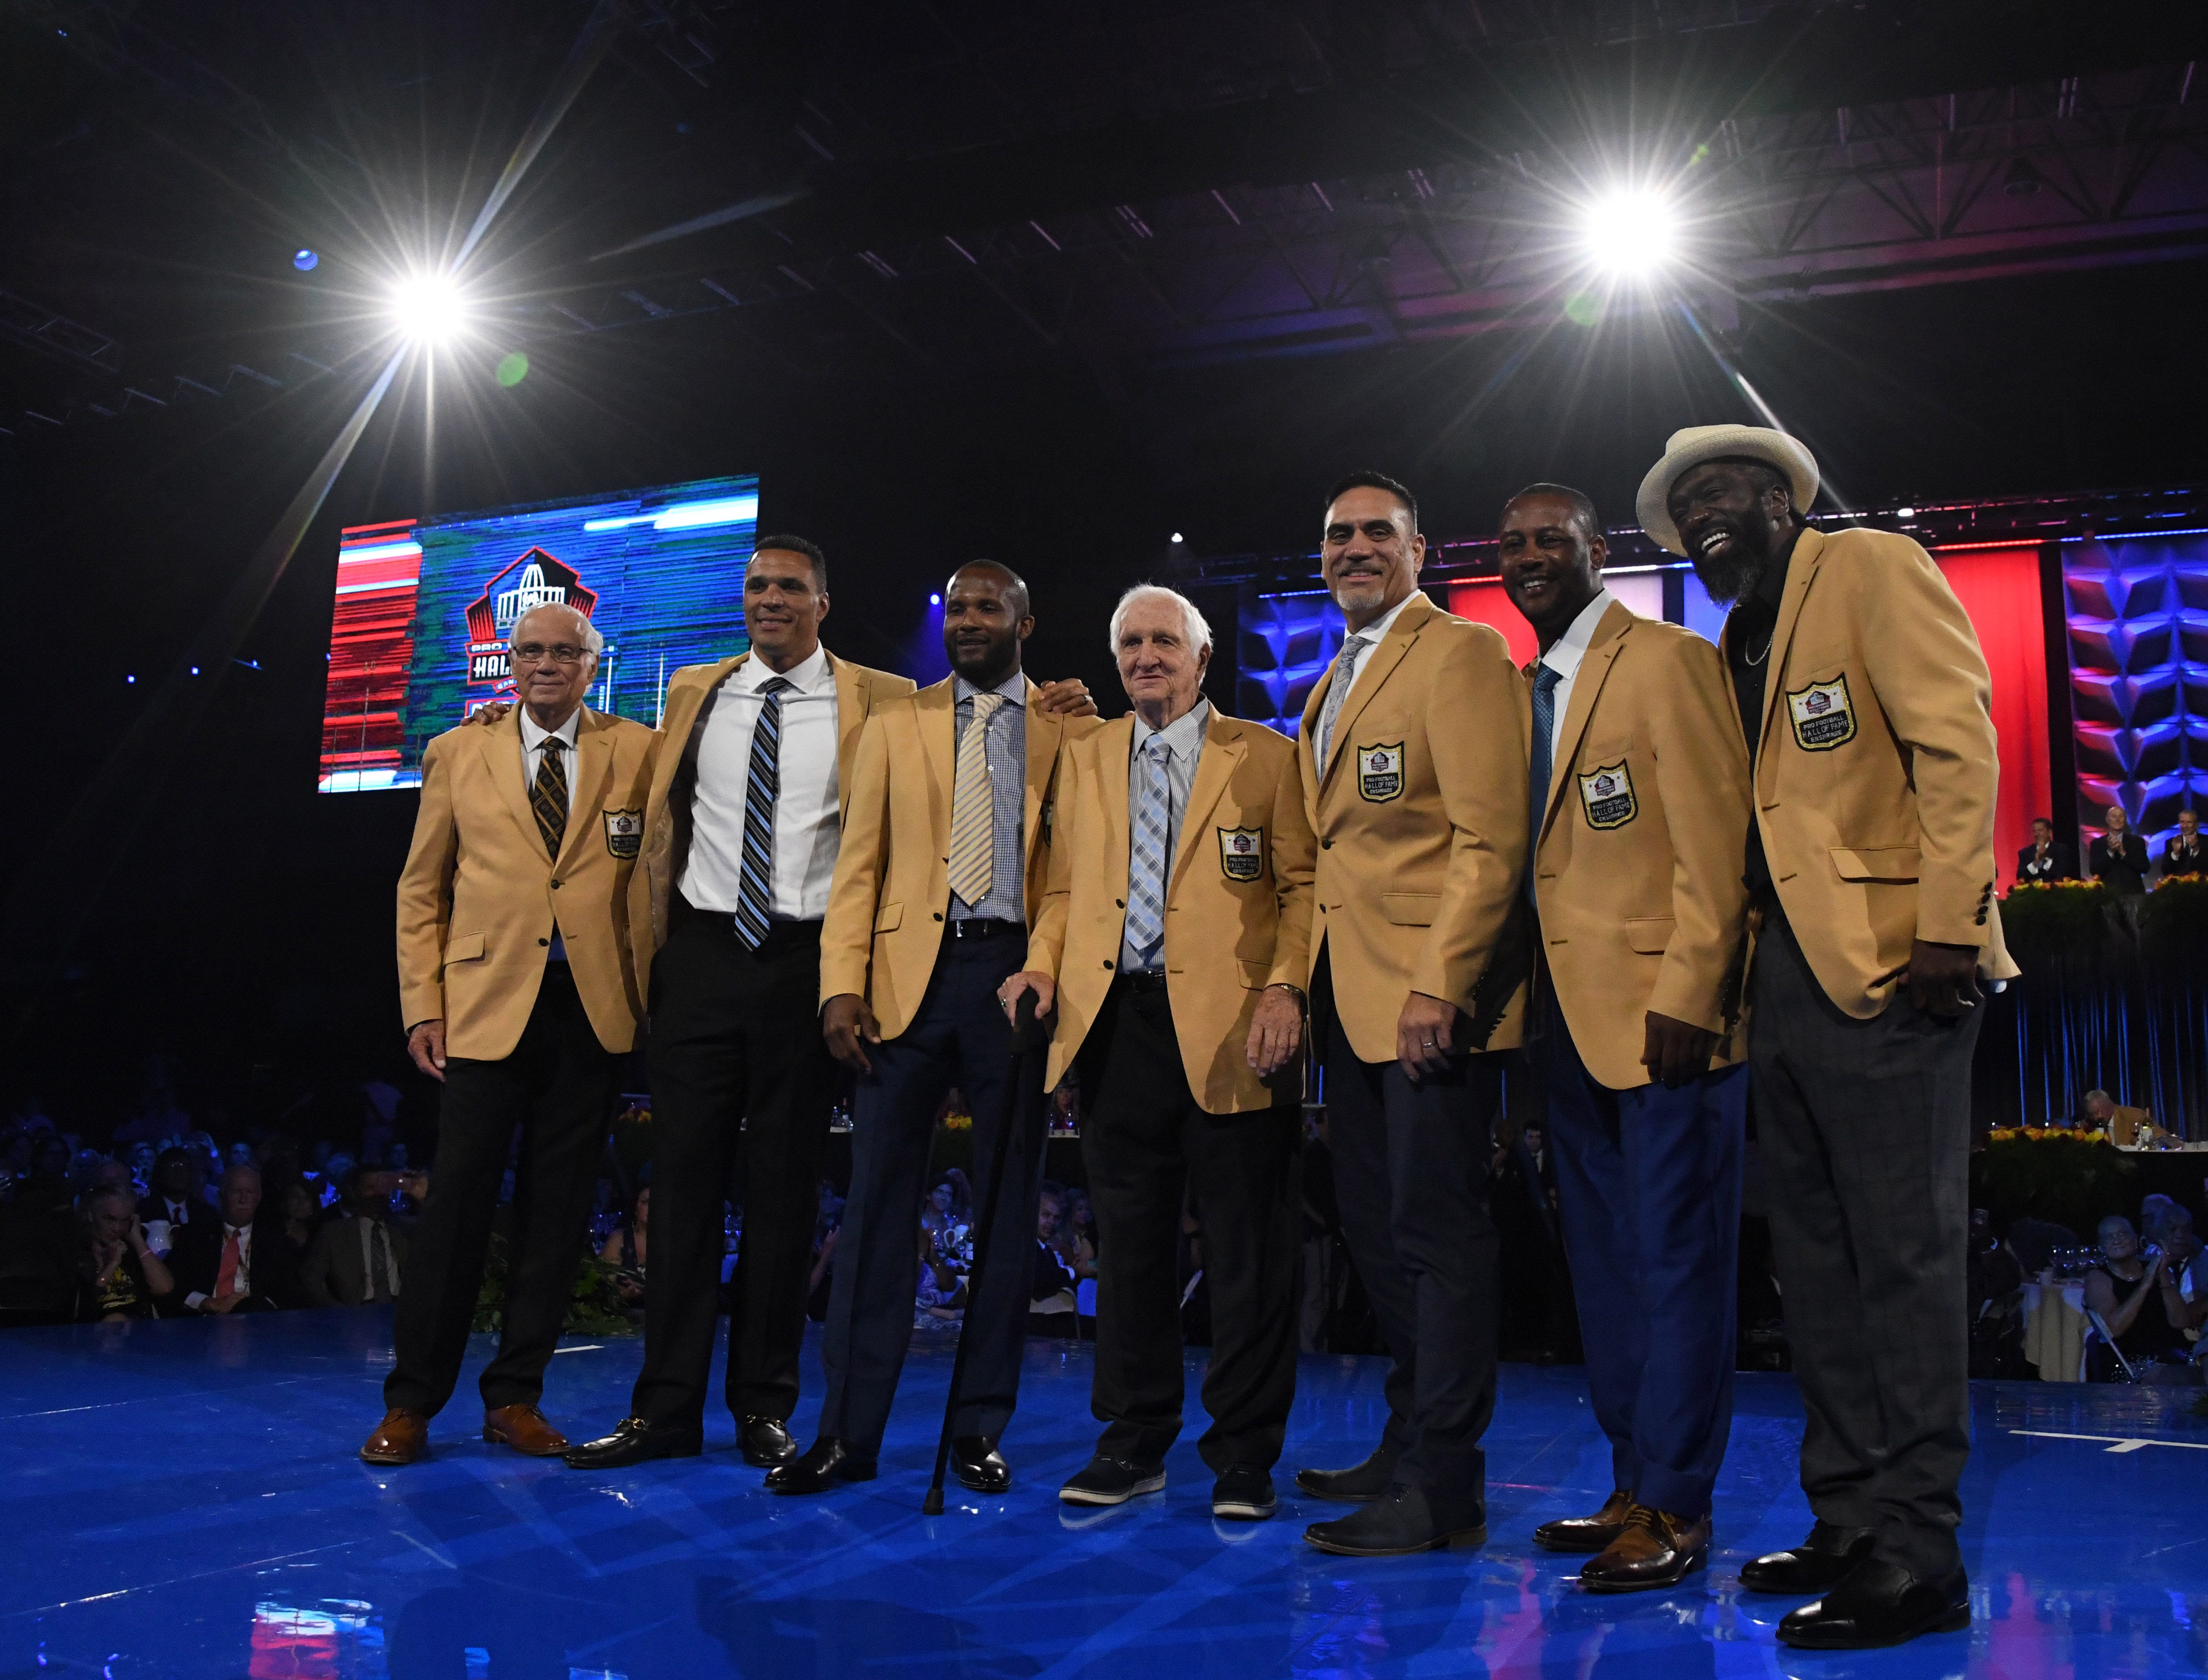 Best photos from Pro Football Hall of Fame Gold Jacket Dinner